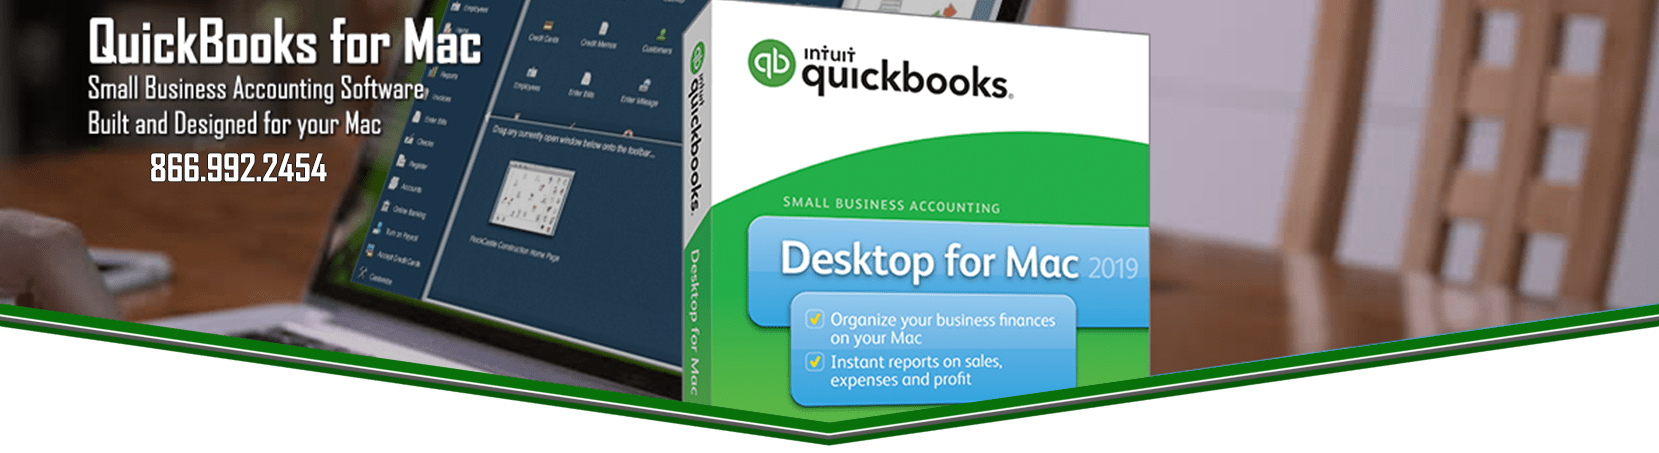 is quickbooks for mac 2016 compatible with sierra